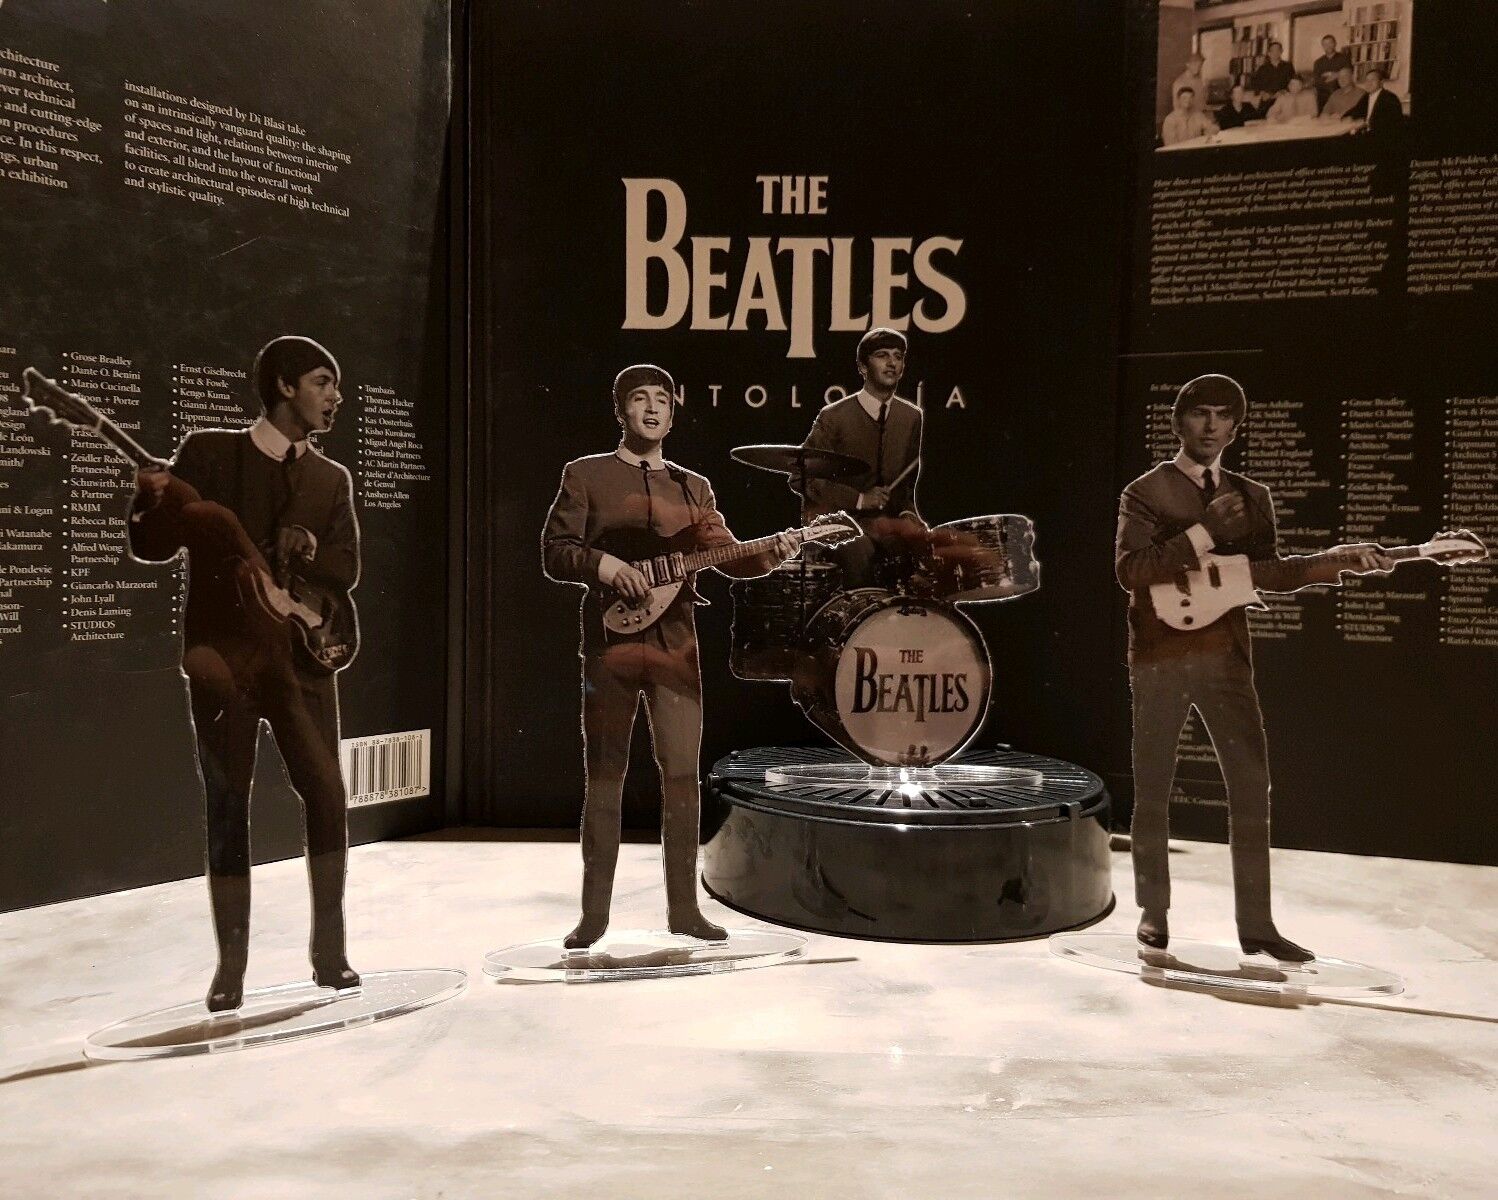 The Beatles figures cristal clear acrylic b&w. They look incredibly real